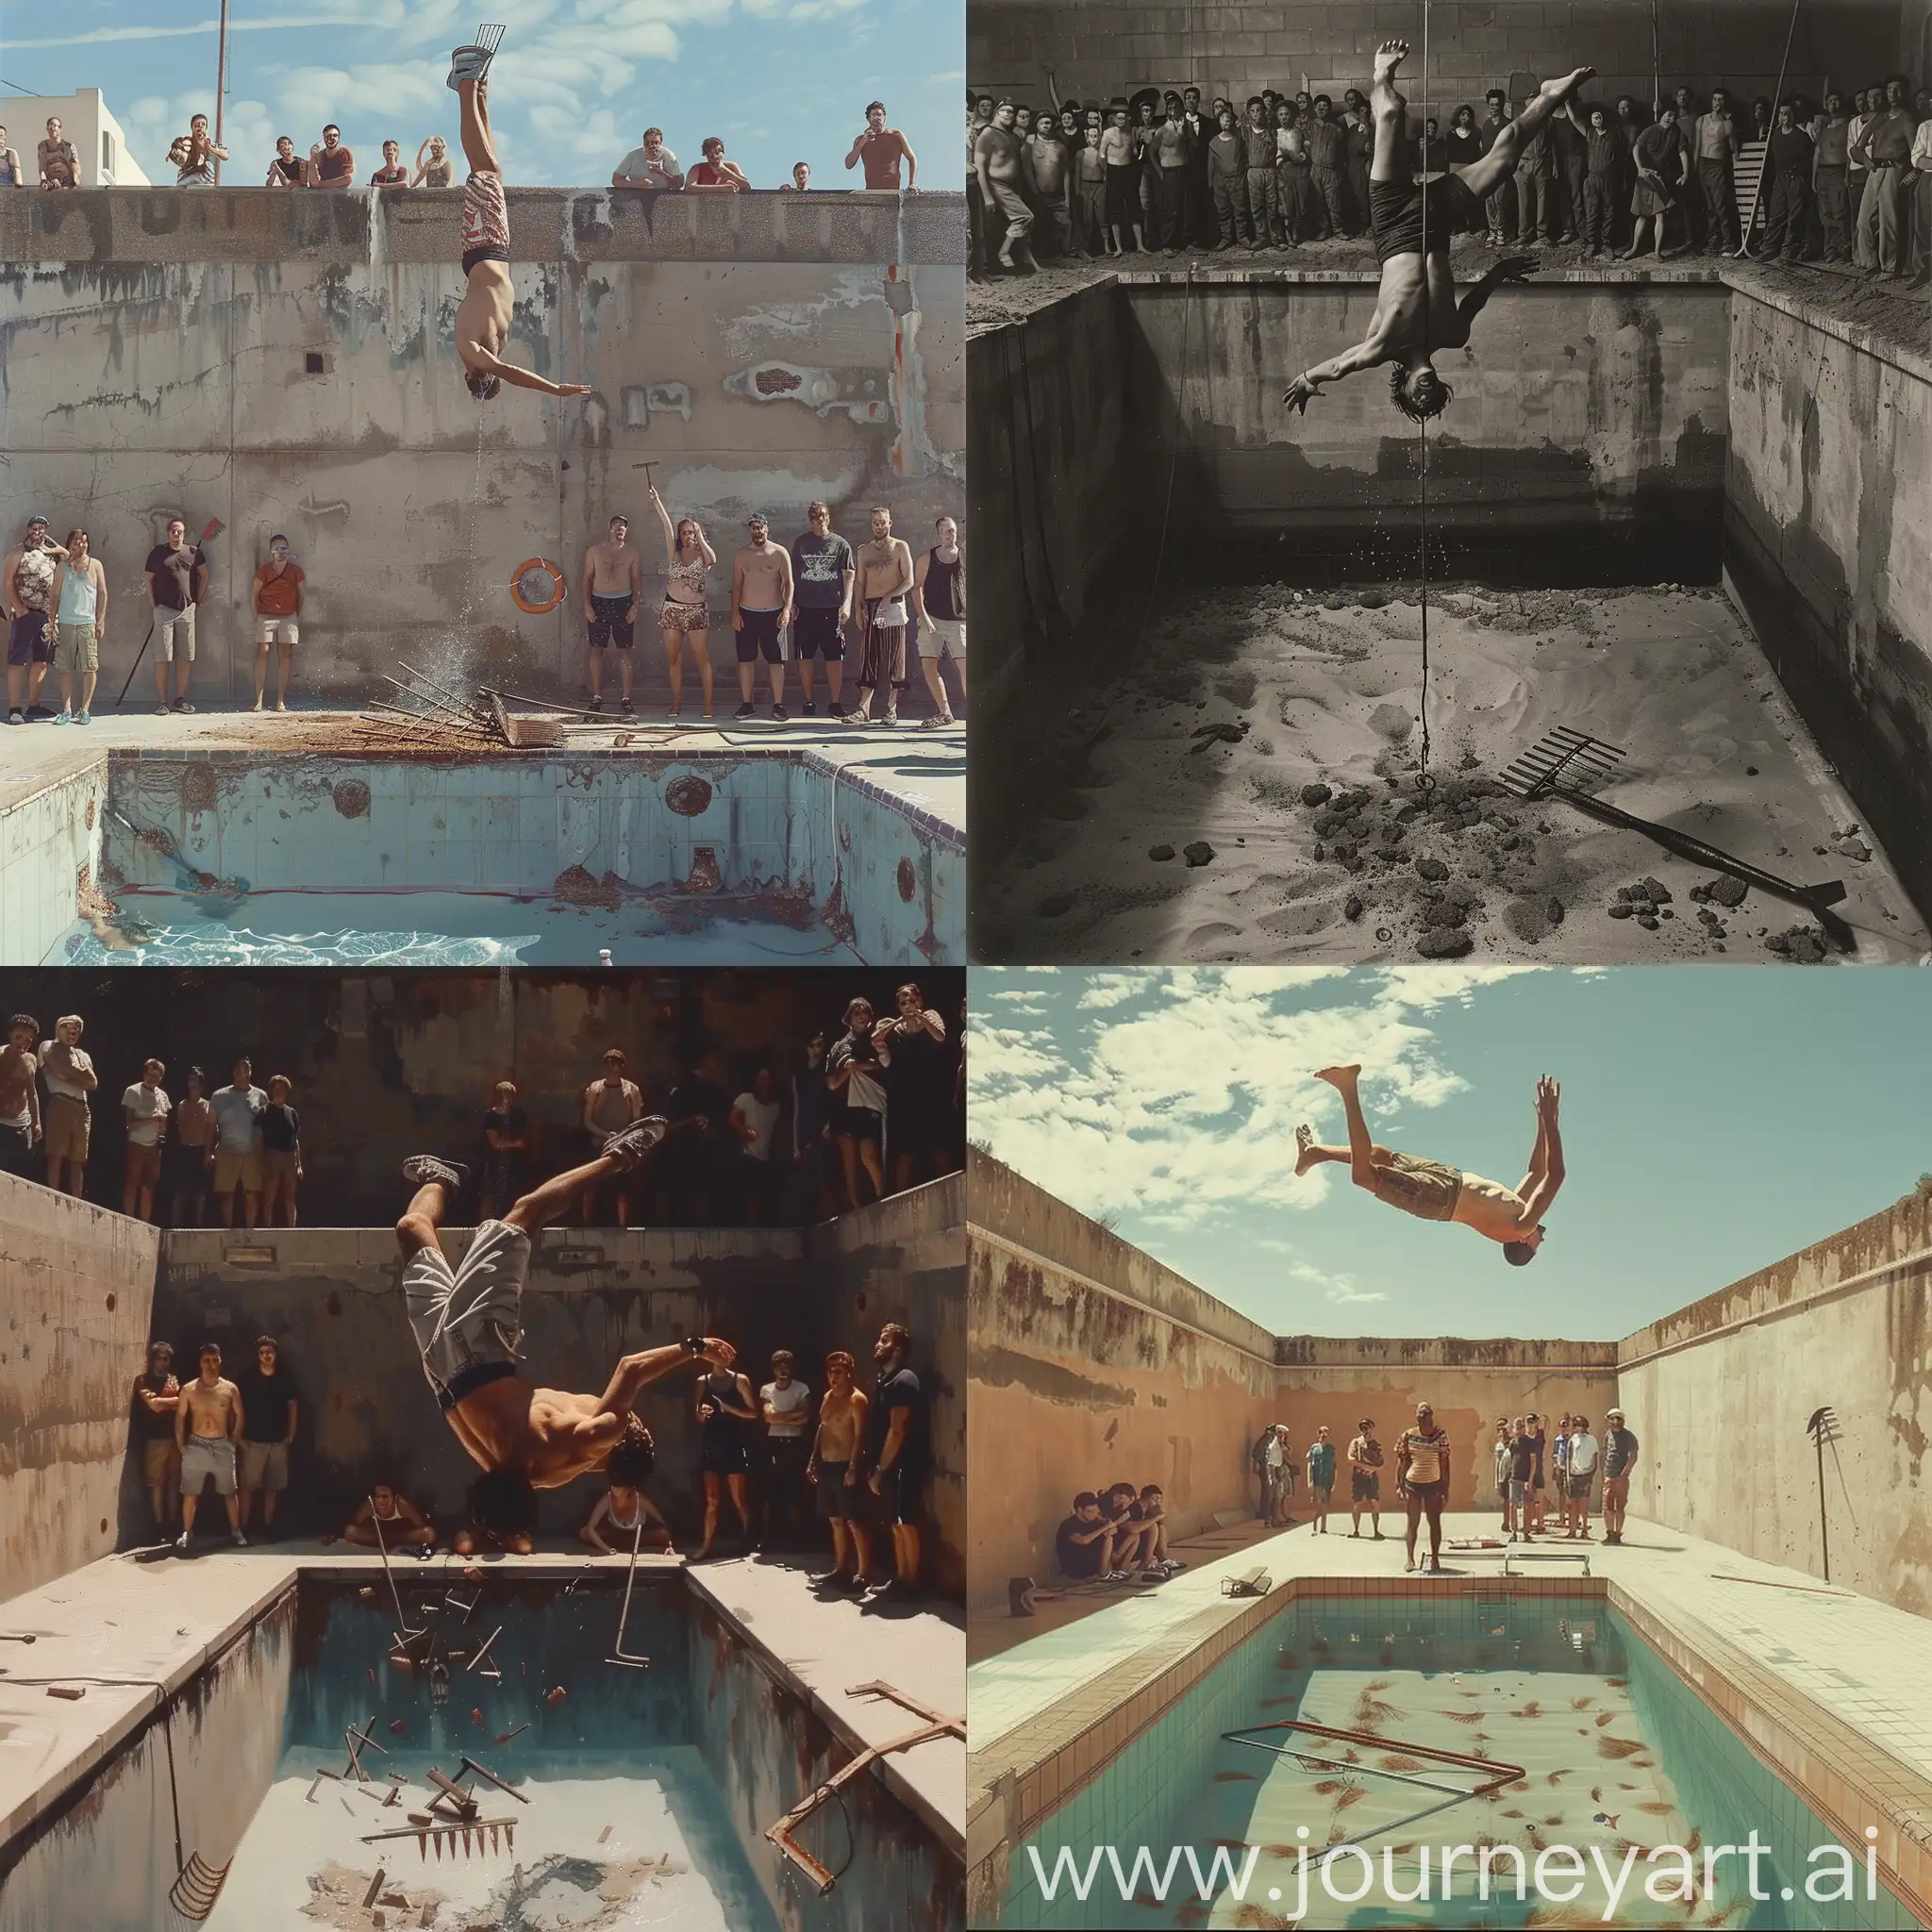 a man jumps upside down into a pool without water, a rake is scattered at the bottom of the pool, the public is watching this